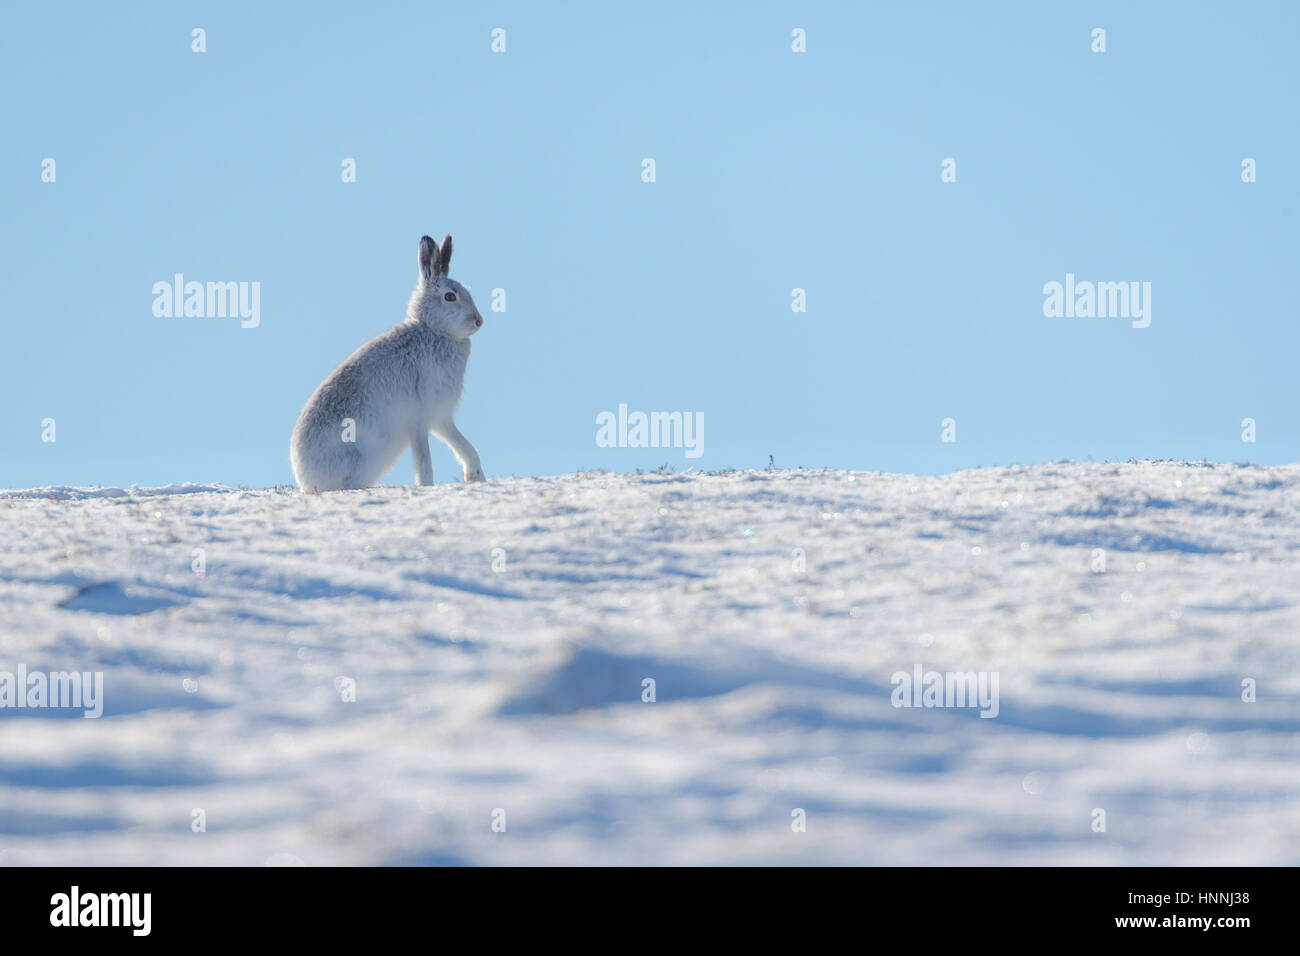 Scottish Mountain Hare (Lepus timidus) stood pictured among a snowy landscape in the Cairngorms National Park, Highlands, Scotland, Great Britain Stock Photo